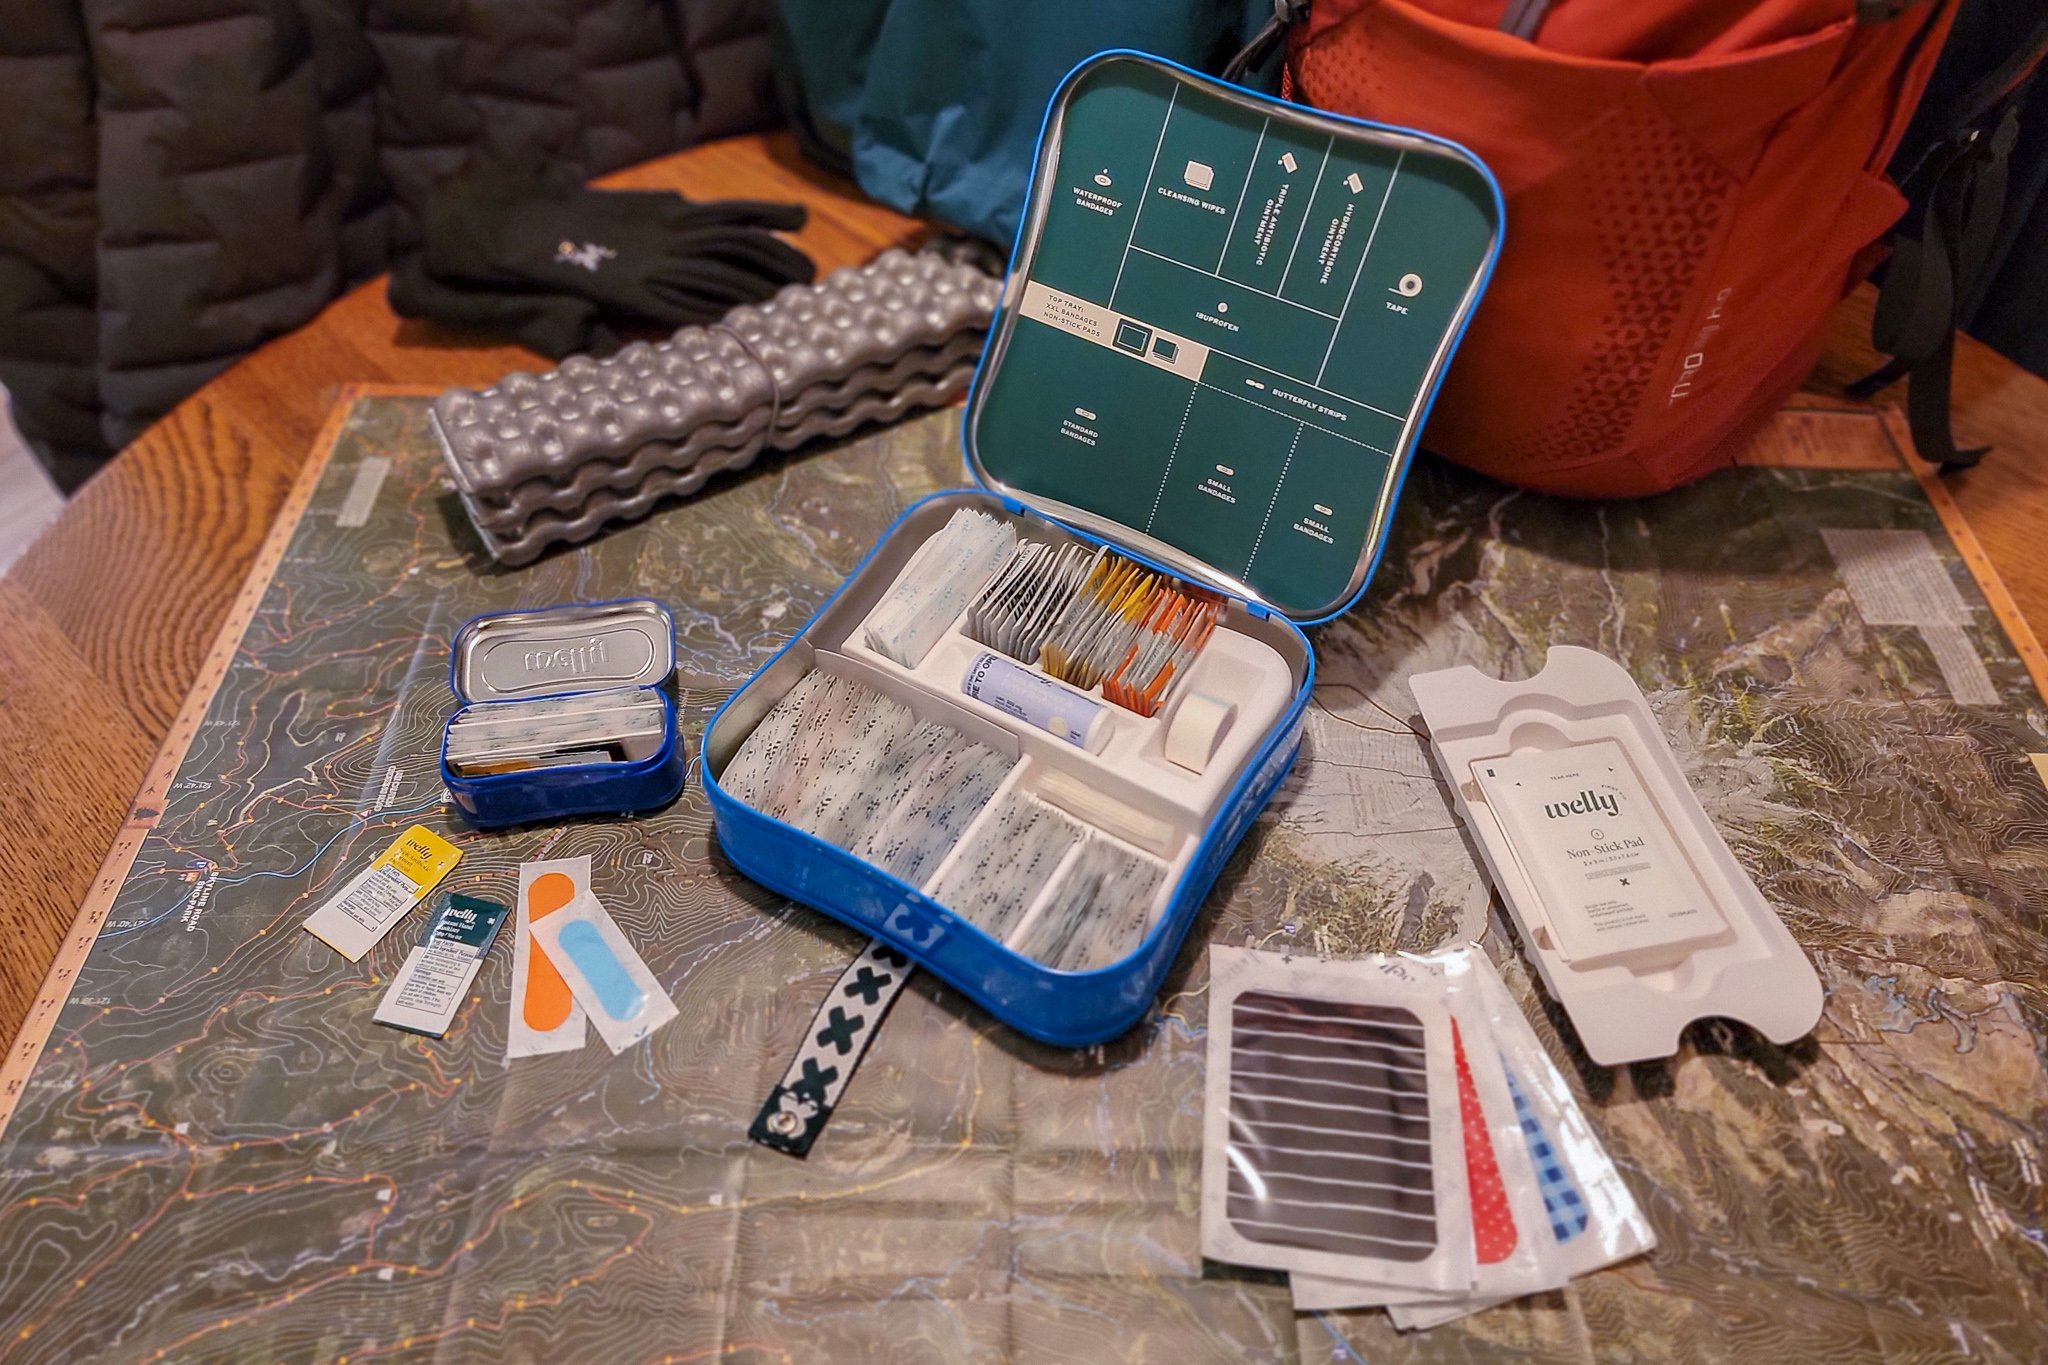 The Welly Excursion and Quick Fix First Aid Kits laid out over a map on the dining room table